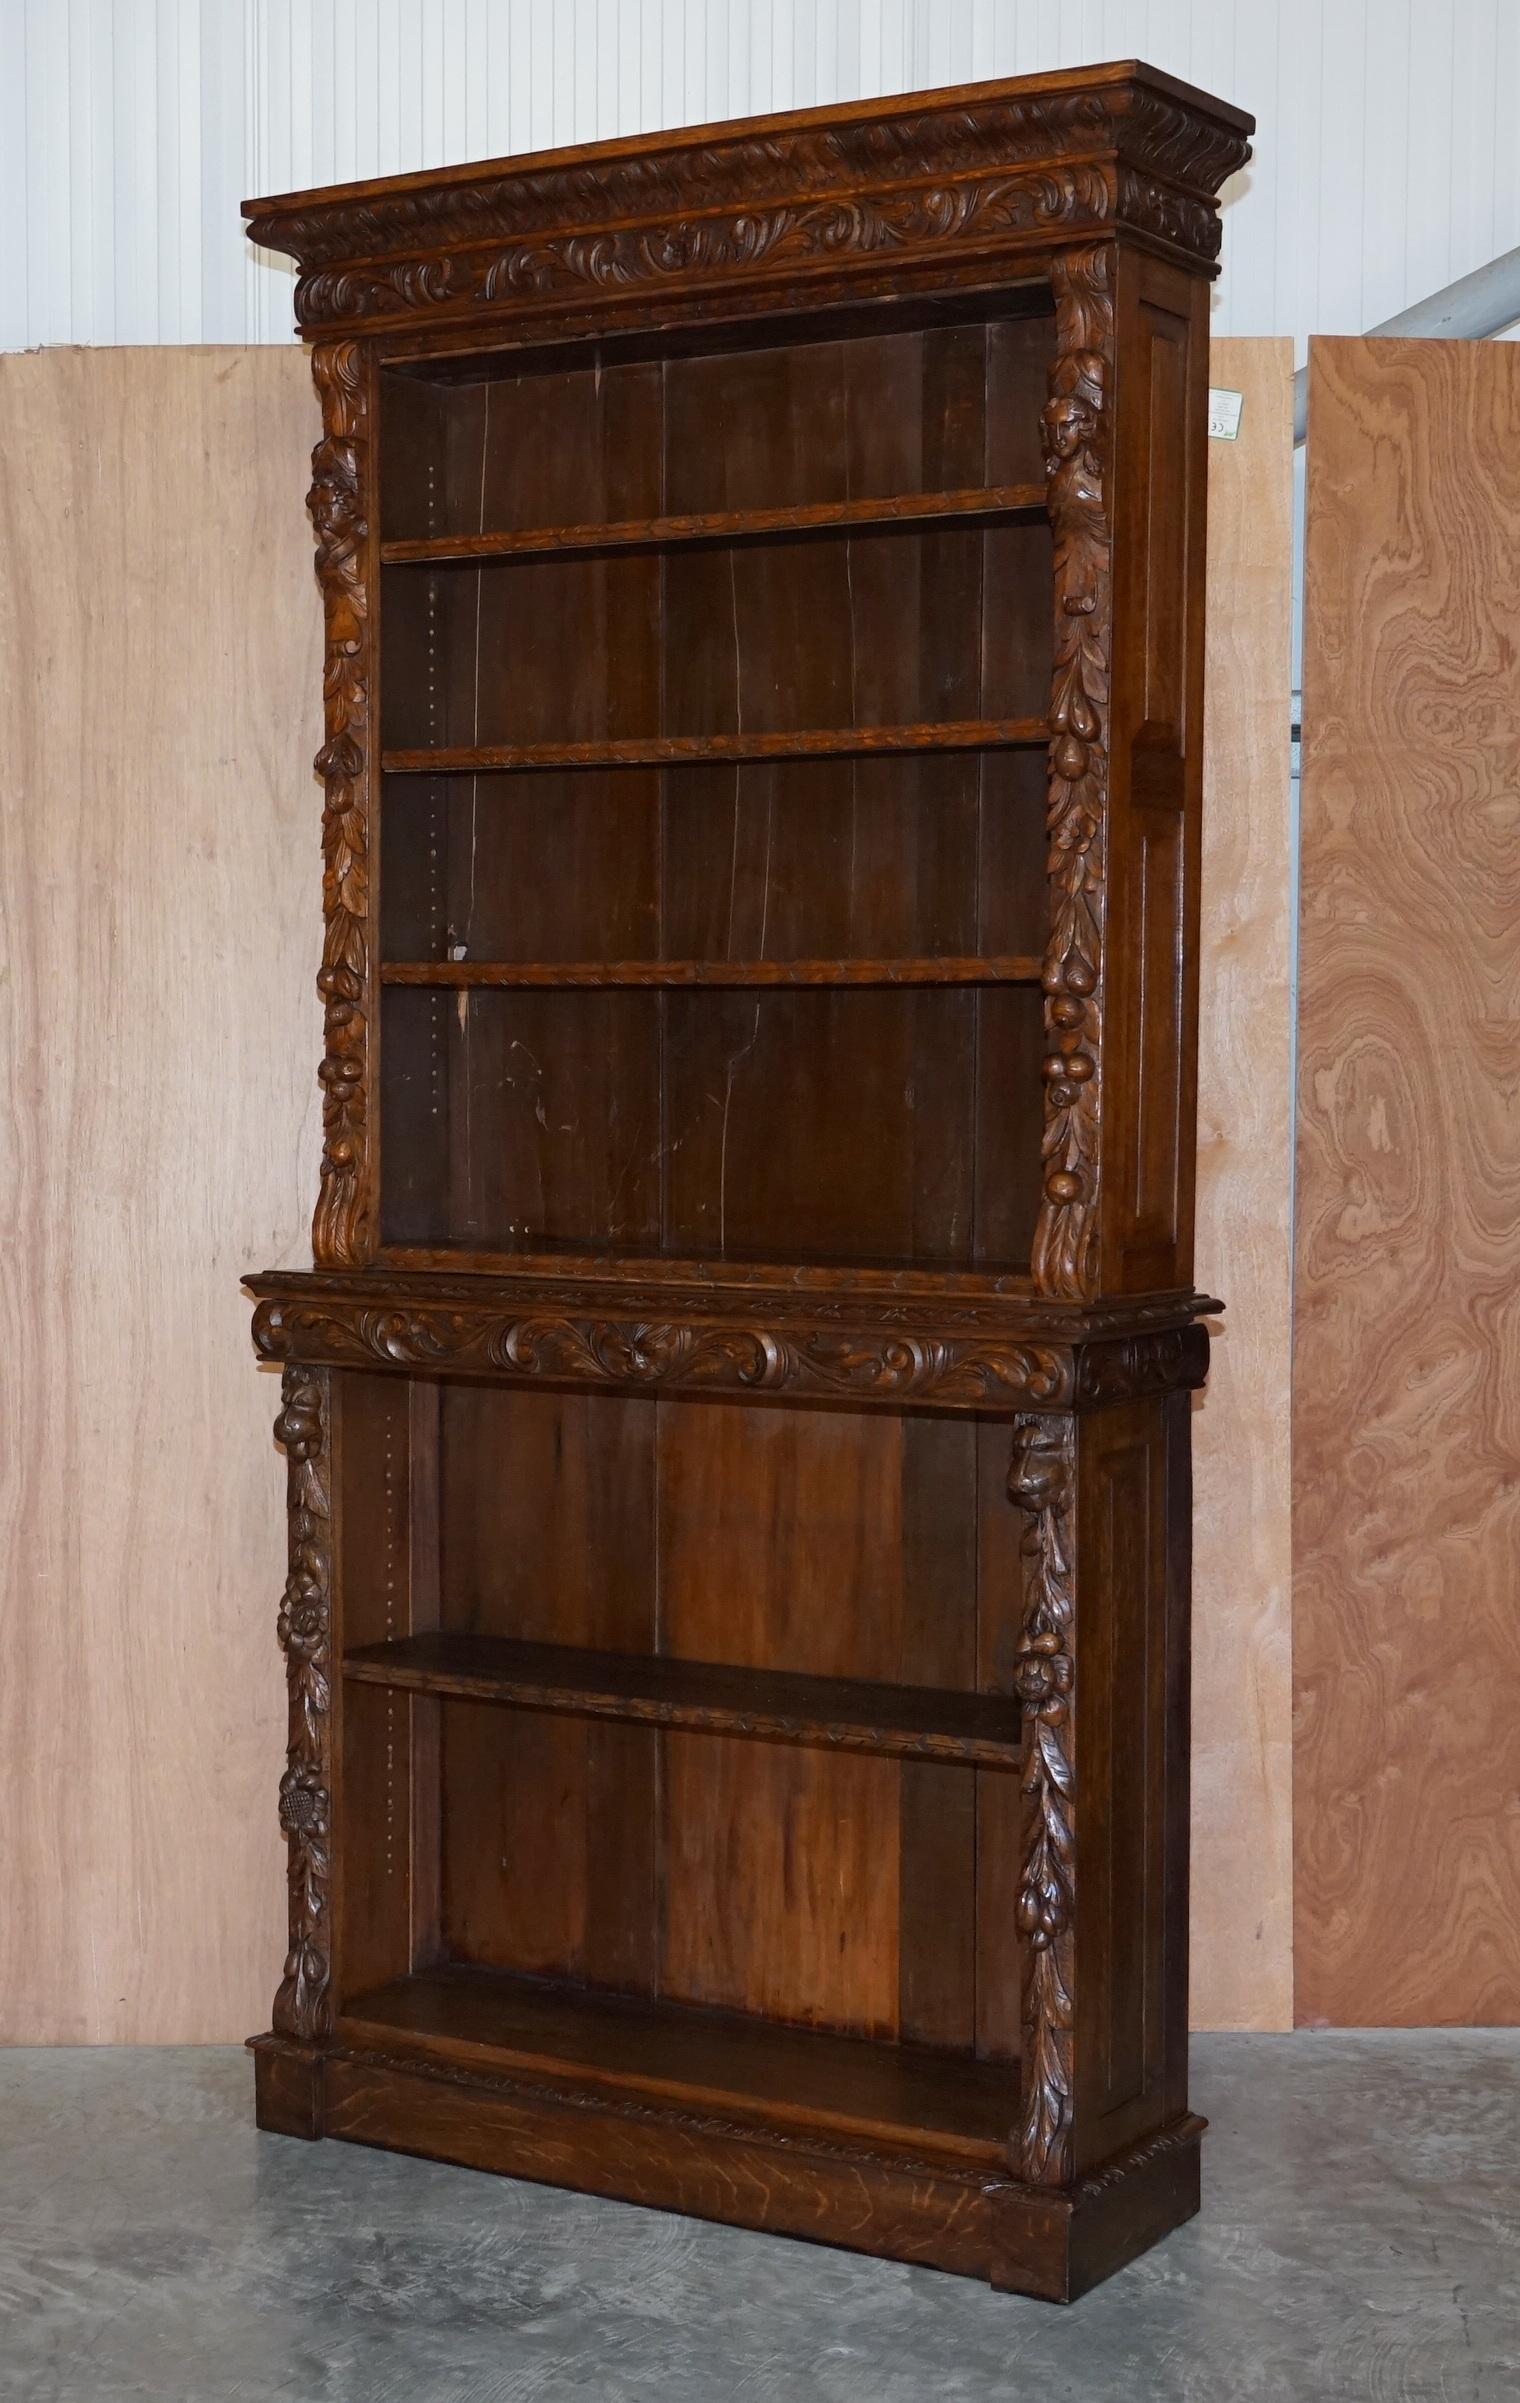 We are delighted to offer for sale this sublime pair of Antique Victorian circa 1860 Jacobean Revival hand carved oak library bookcases

These are a very large and well made pair, they come with four height adjustable and removable shelves. They